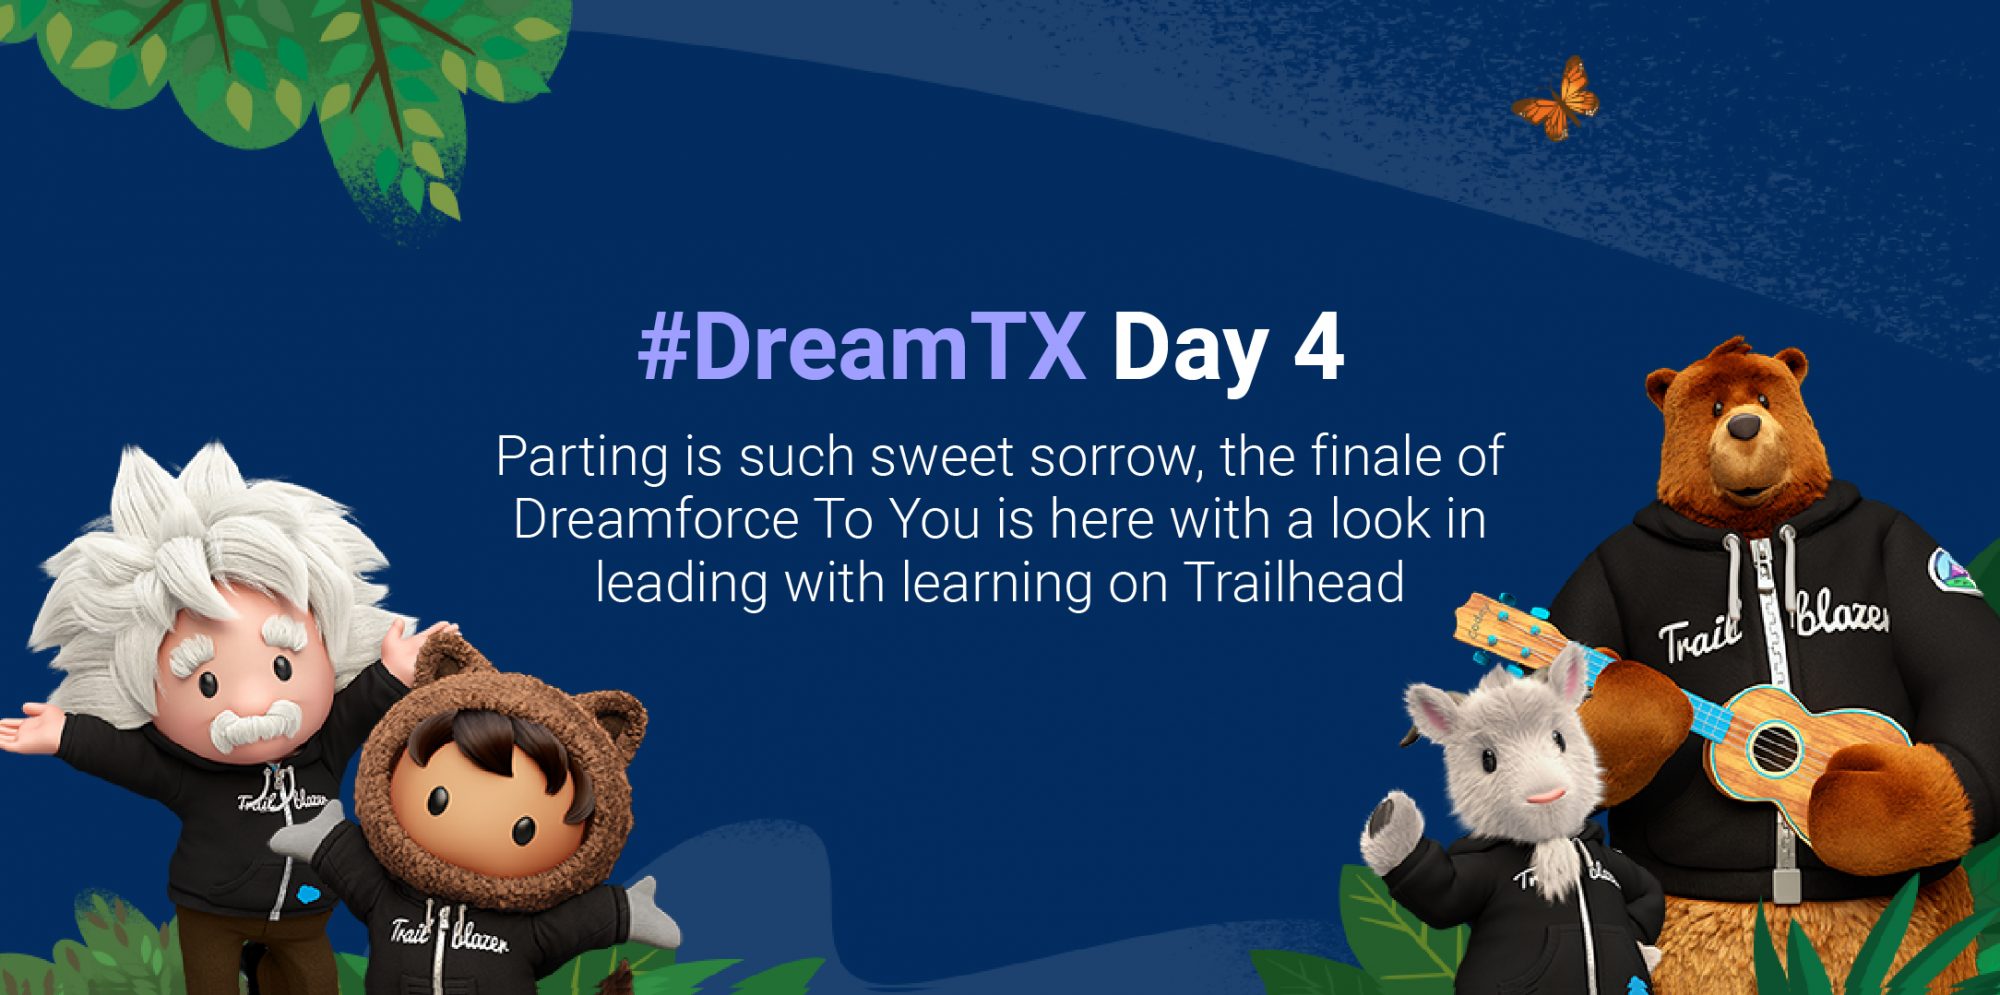 #DreamTX Day 4: The finale of Dreamforce To You is here!